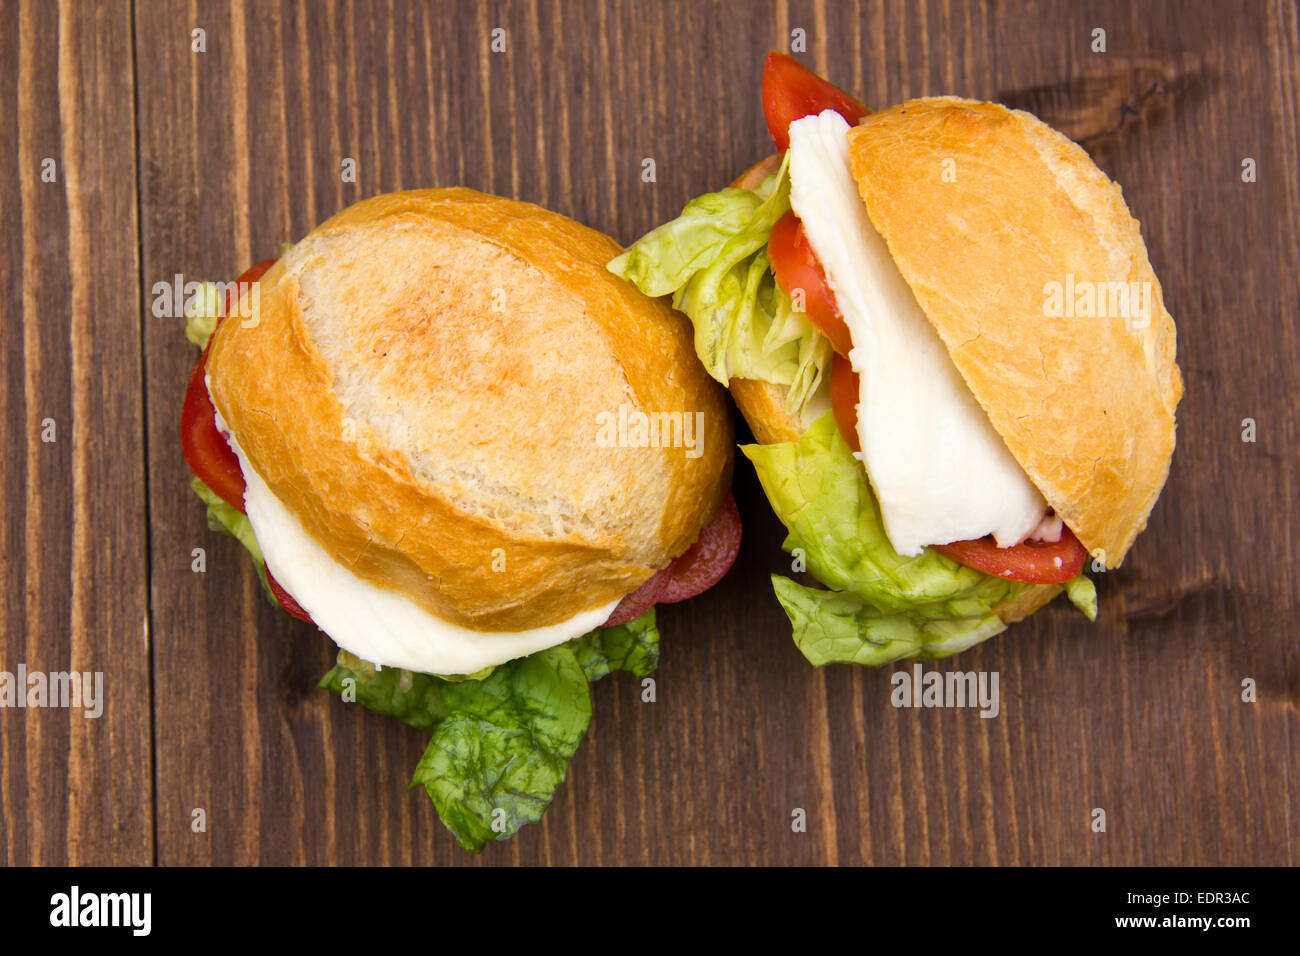 Sandwiches with cheese and tomatoes on wooden table seen from above Stock Photo